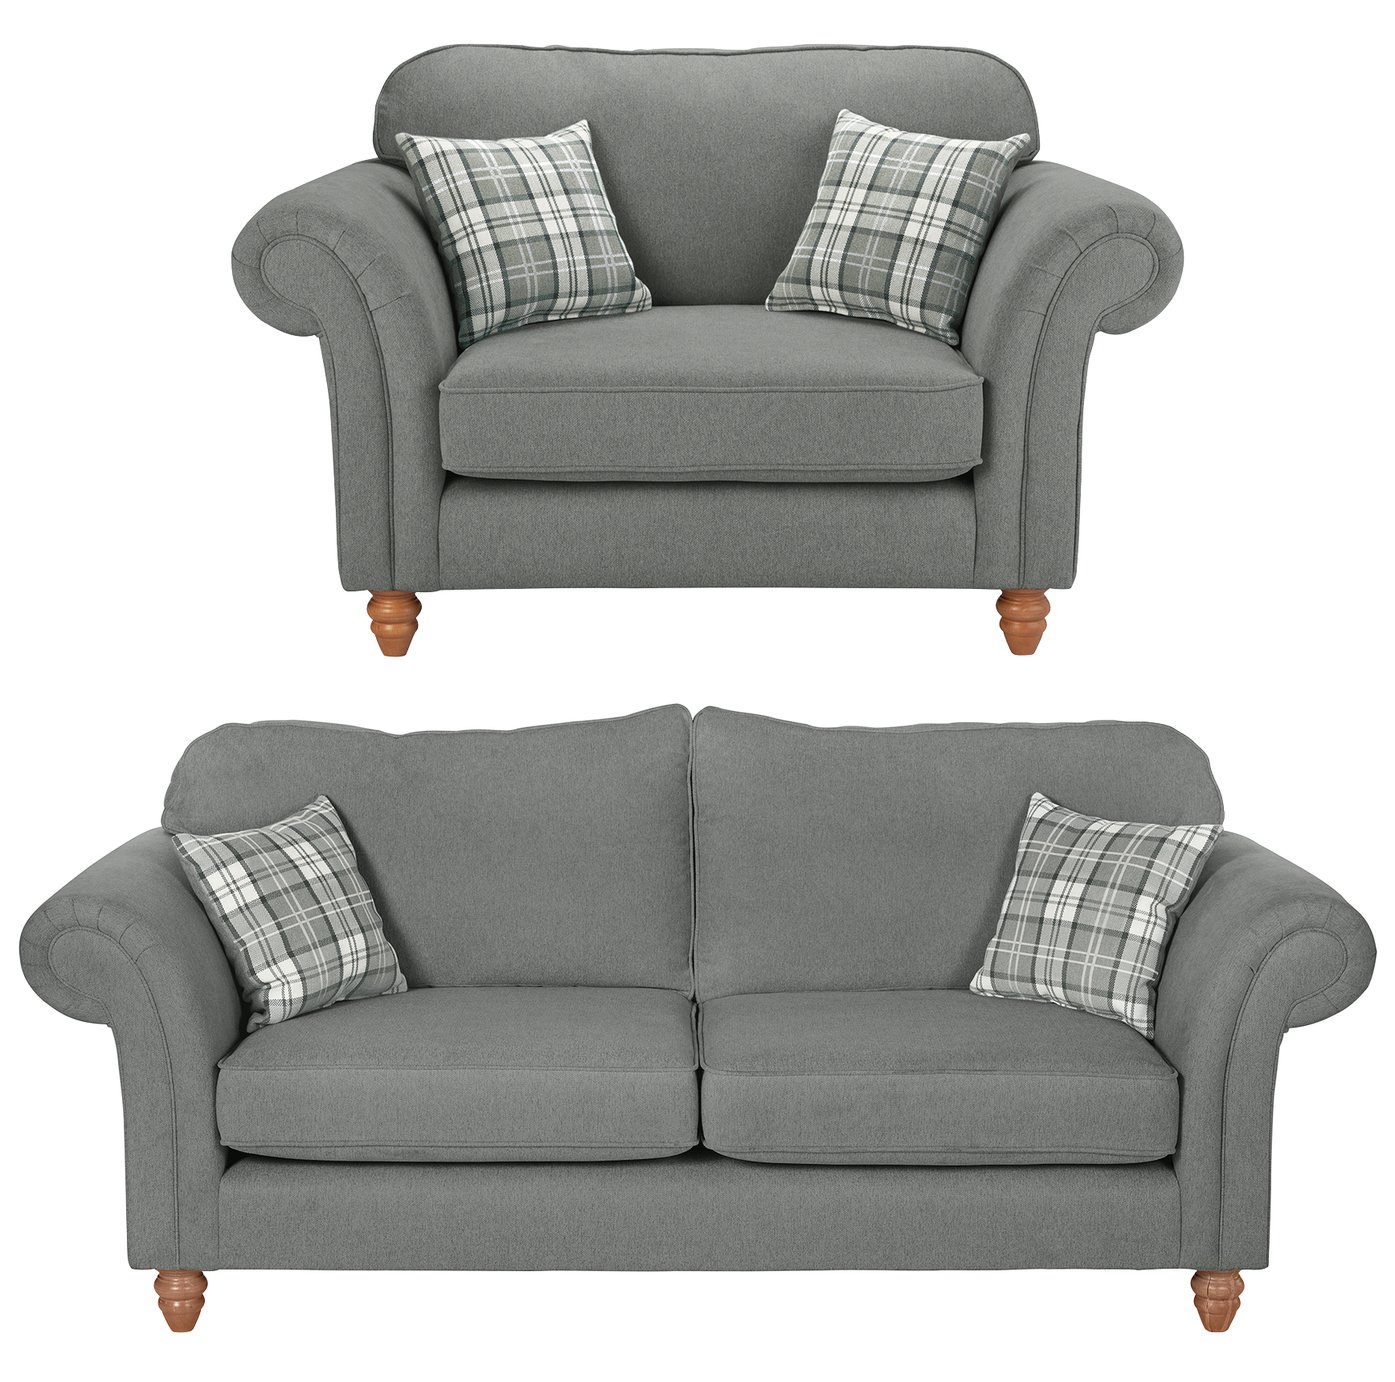 Argos Home Windsor Fabric Chair & 3 Seater Sofa review